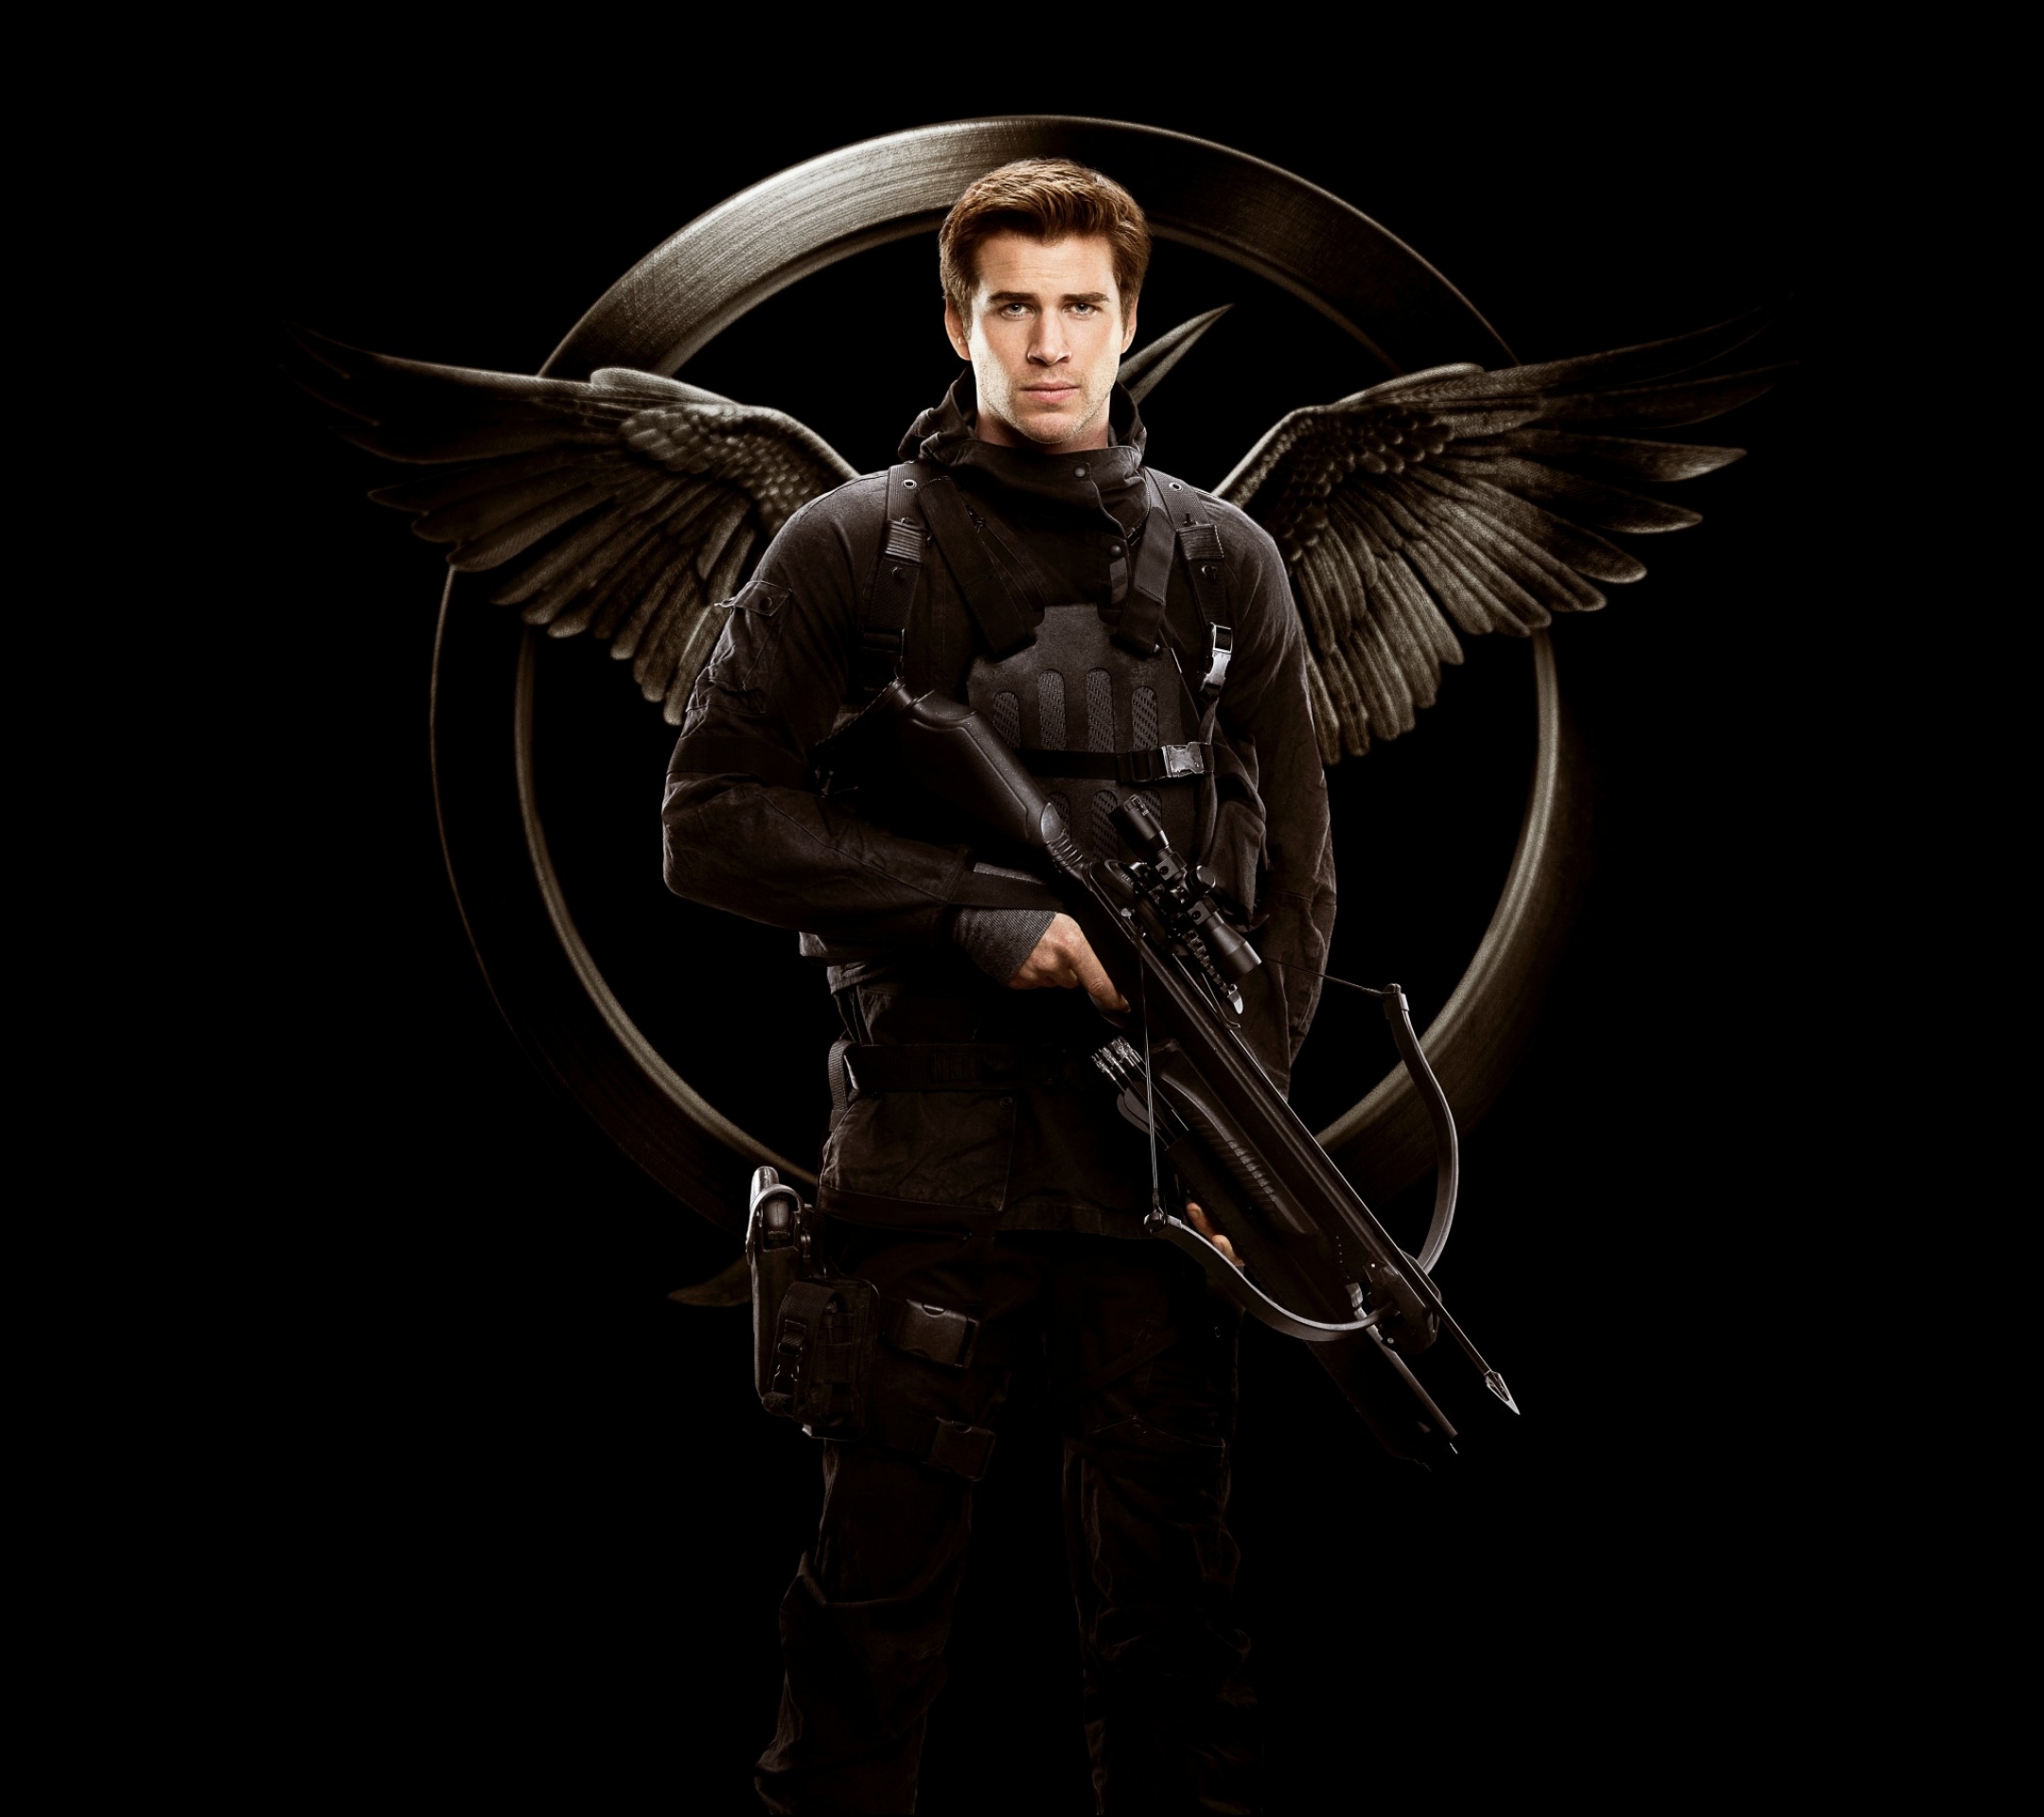 movie, the hunger games: mockingjay part 1, the hunger games, mockingjay, liam hemsworth, gale hawthorne